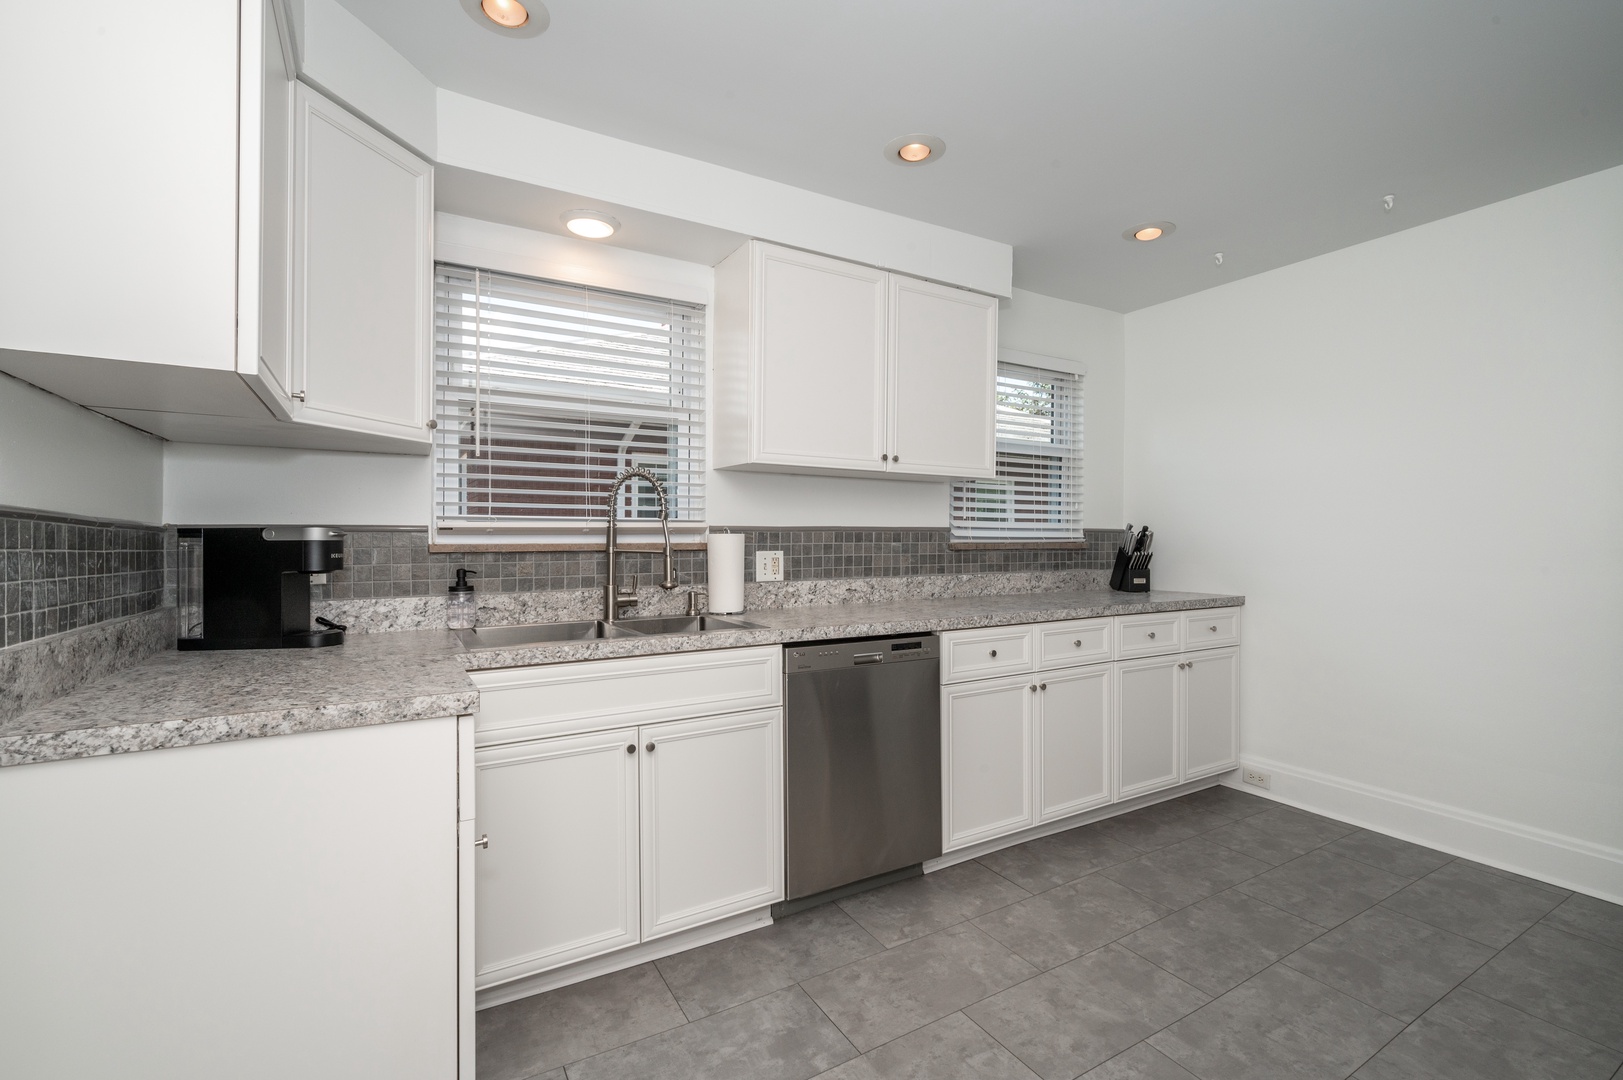 Unit 2 – The large, airy kitchen is well-equipped for your visit